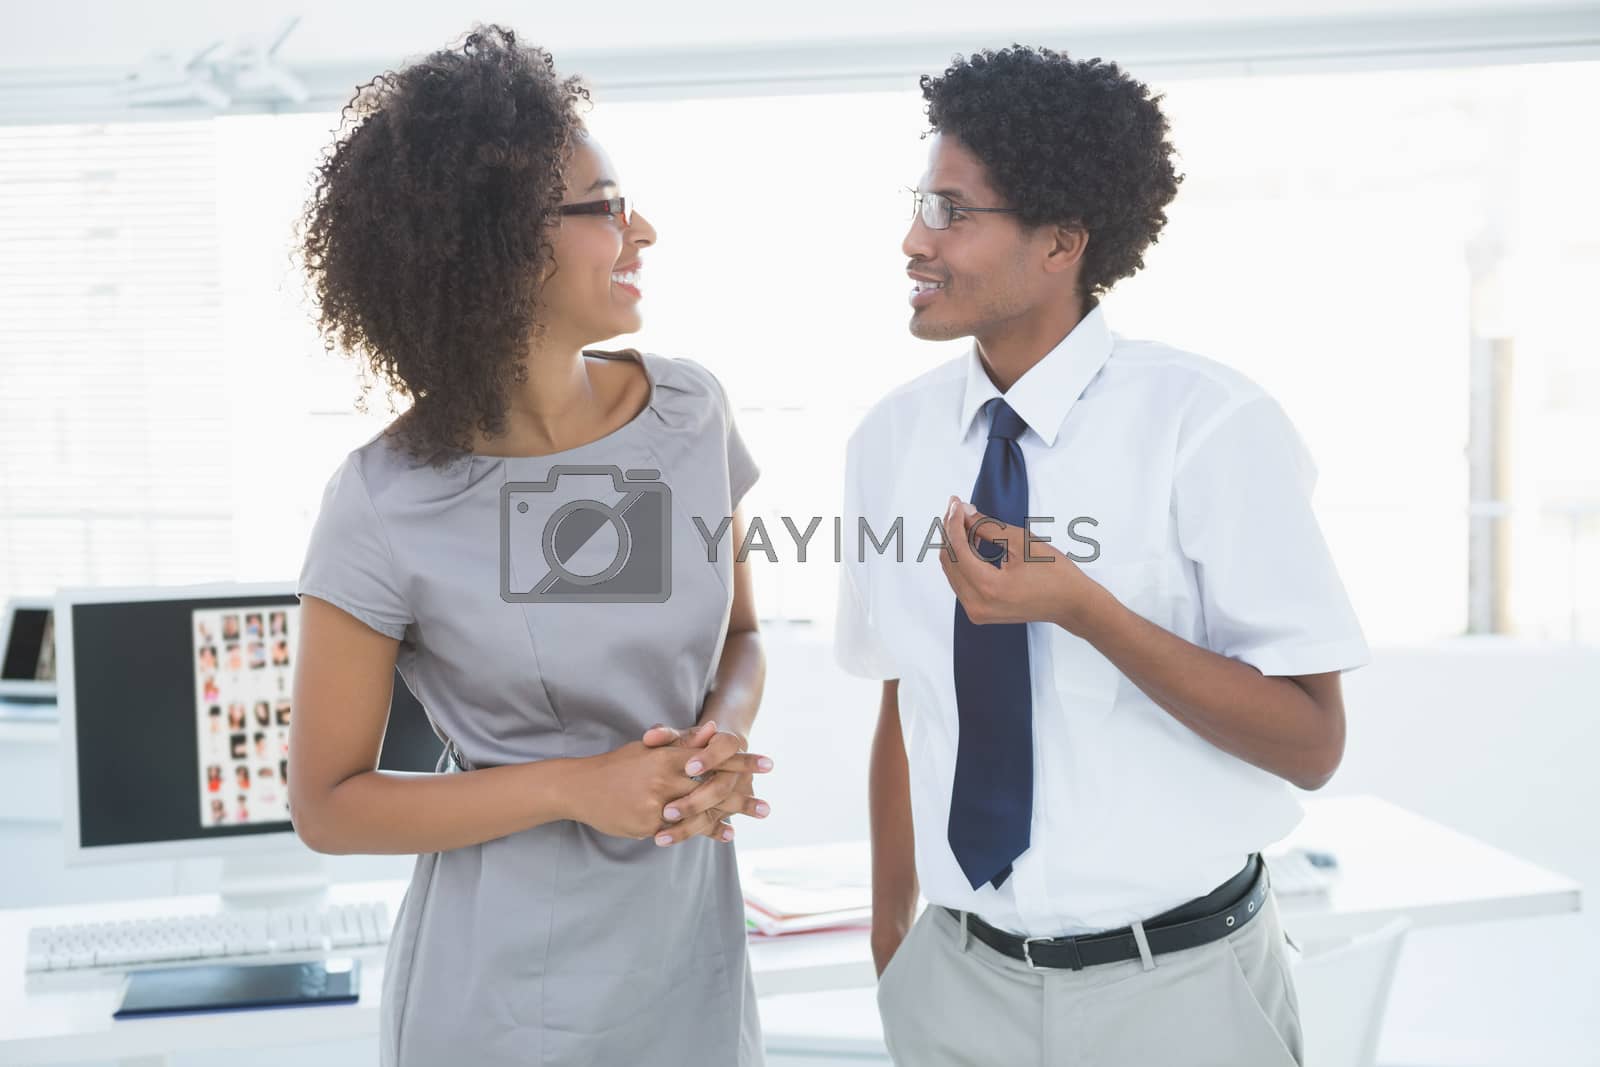 Royalty free image of Young editorial team talking together by Wavebreakmedia